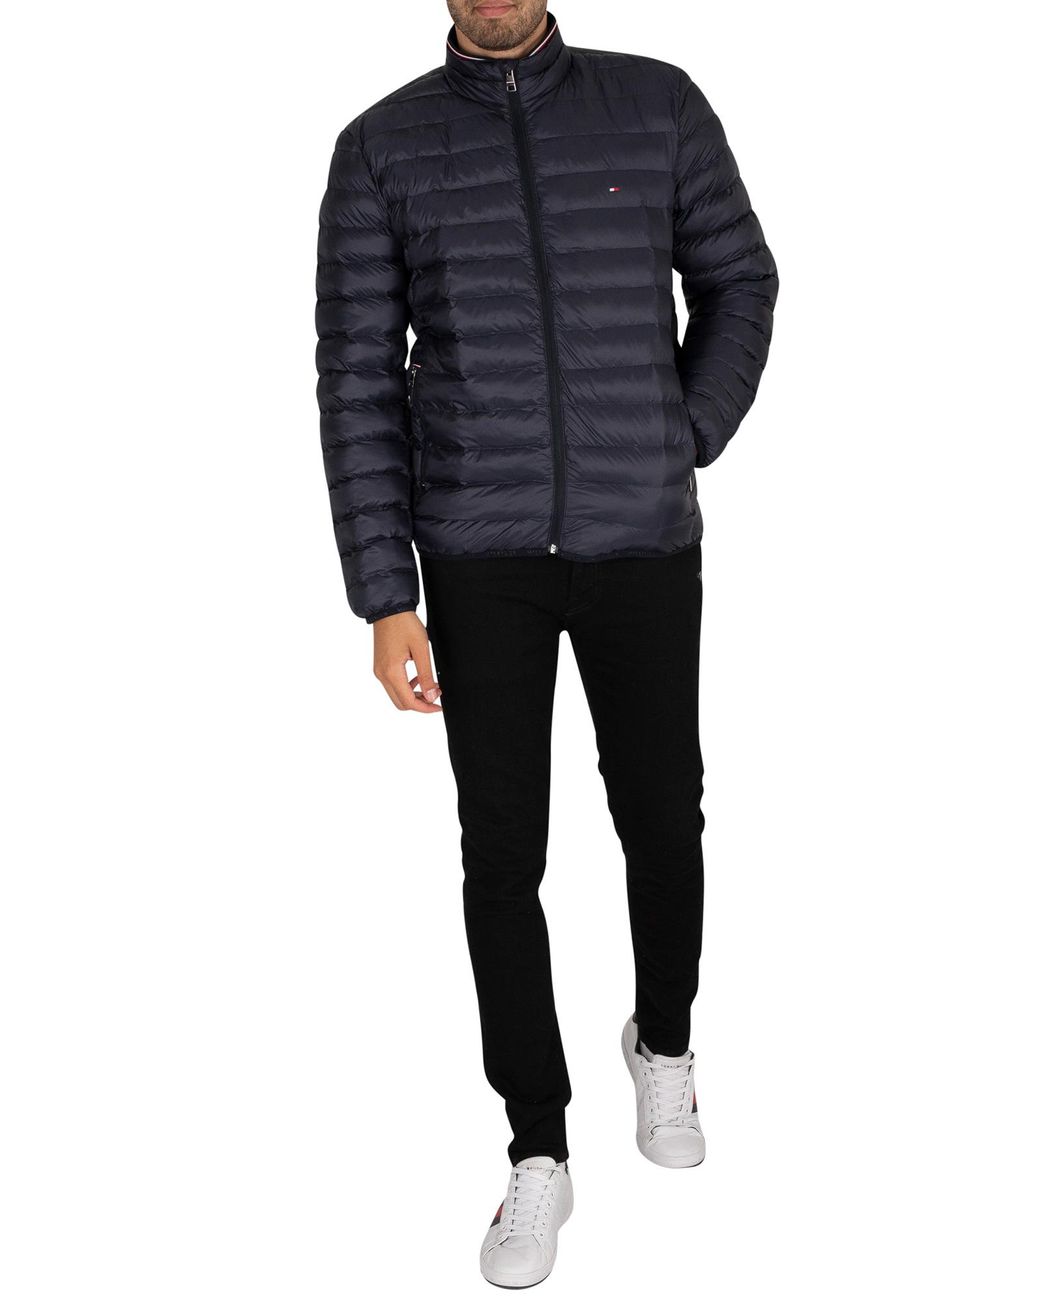 Core Lyst Packable in Tommy | Jacket Australia Circular Blue for Men Hilfiger